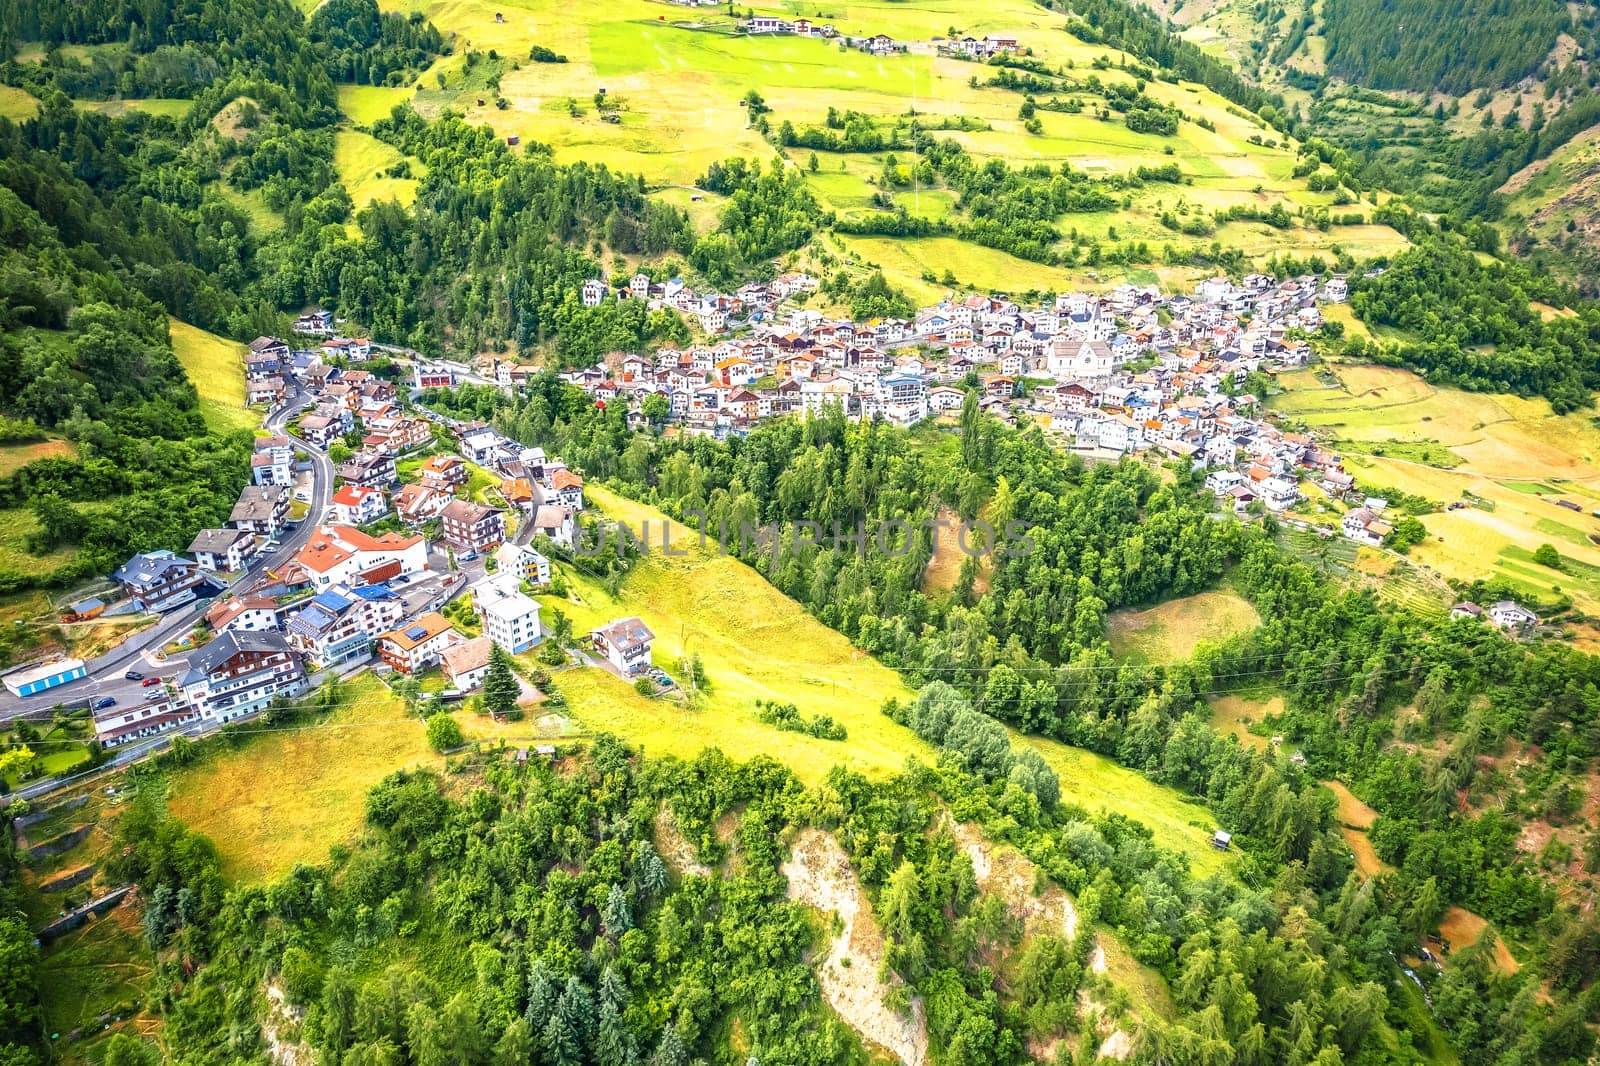 Stelvio village or Stilfs in Dolomites Alps landscape aerial view, province of South Tyrol in northern Italy.